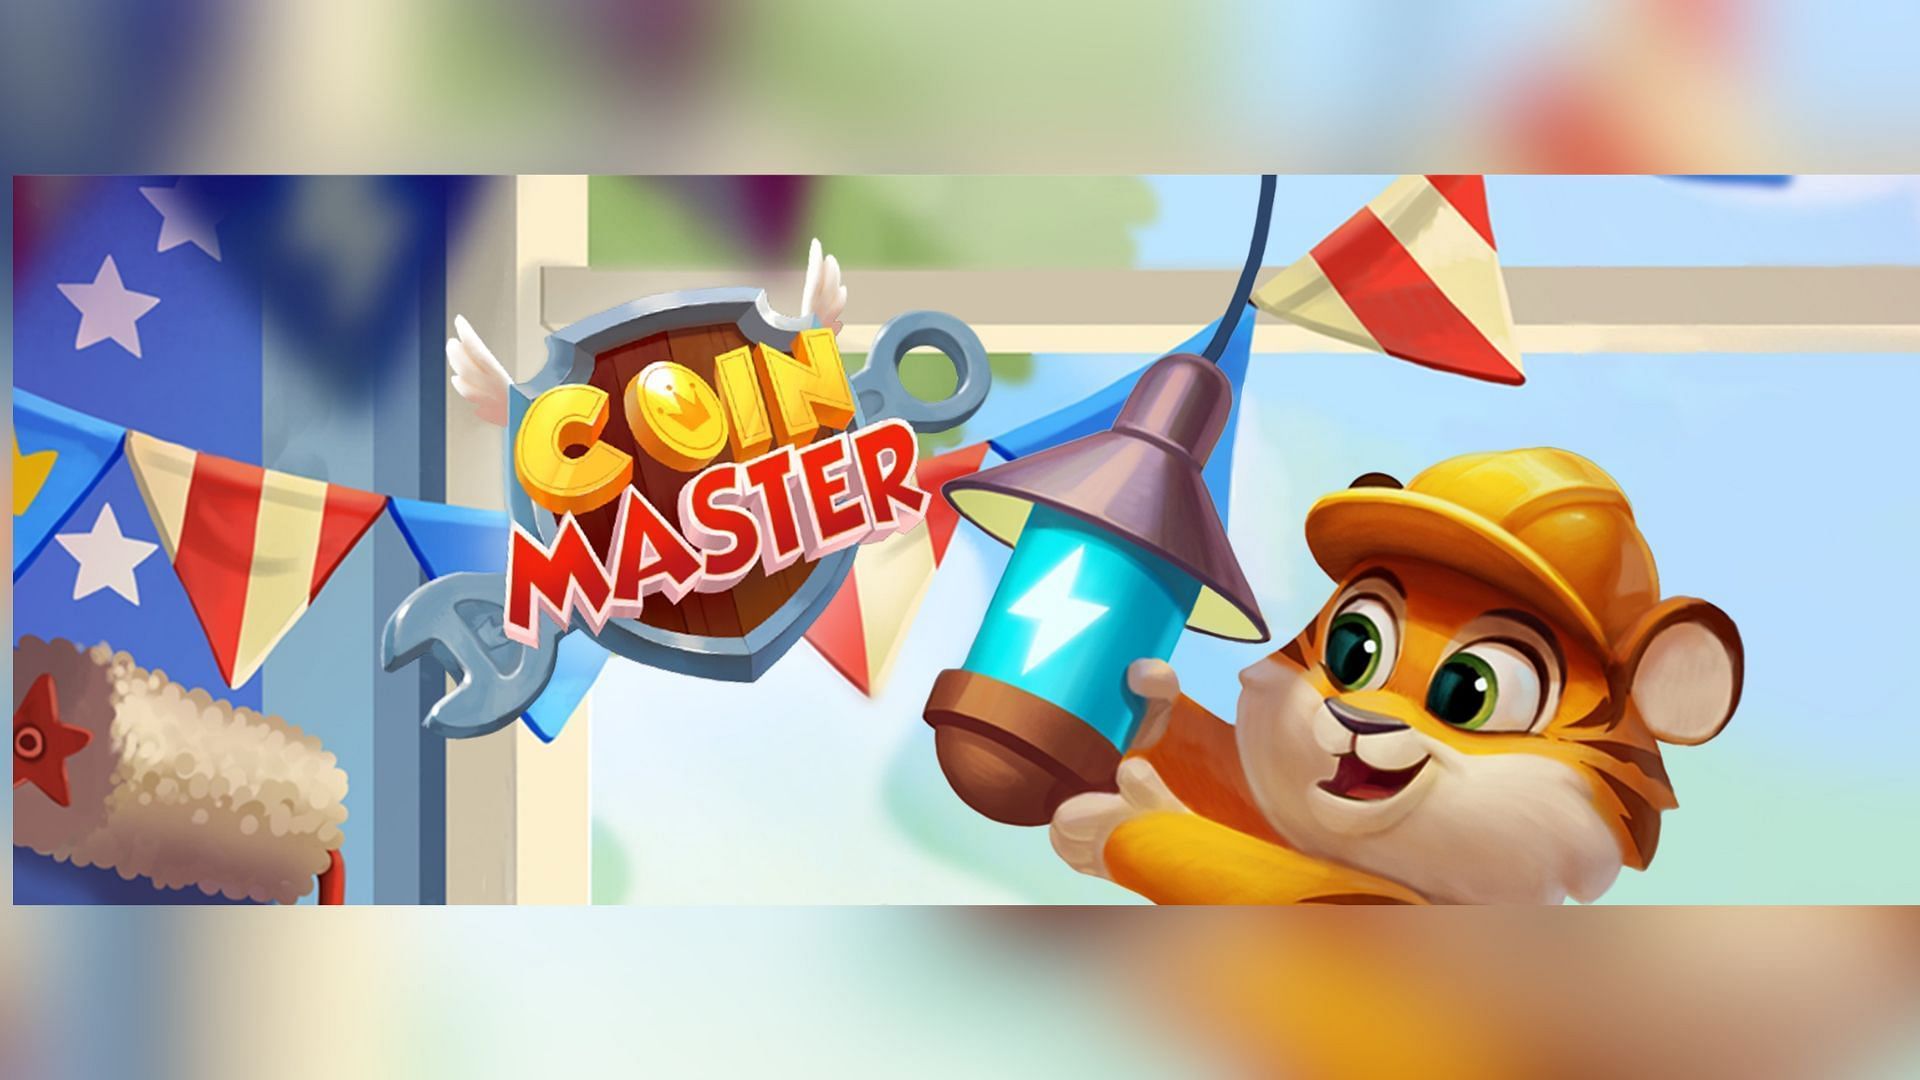 You can redeem daily links and get free spins daily (Image via Moon Active)